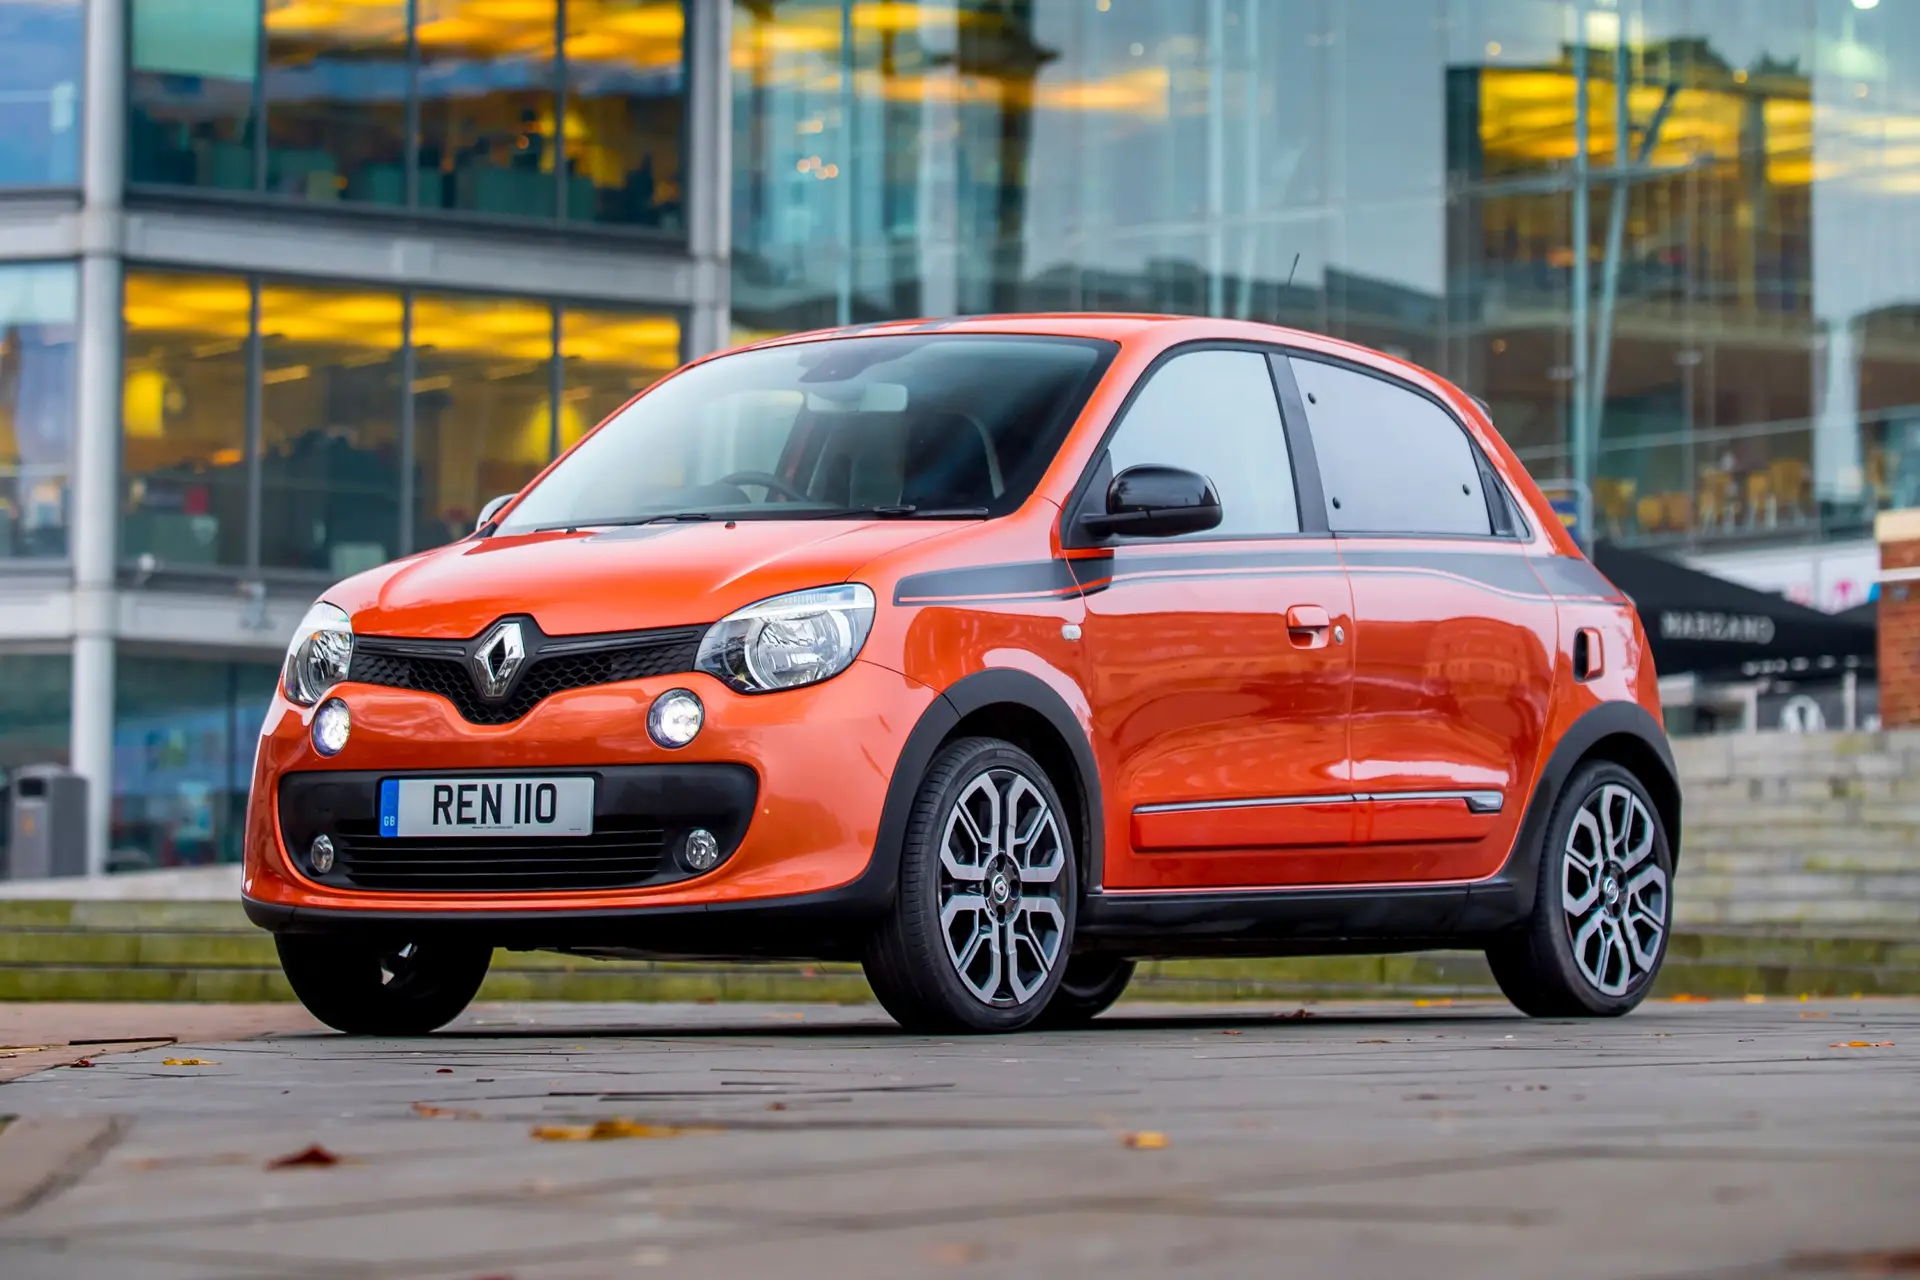 Renault Twingo (2014-2019) Review: exterior front three quarter photo of the Renault Twingo